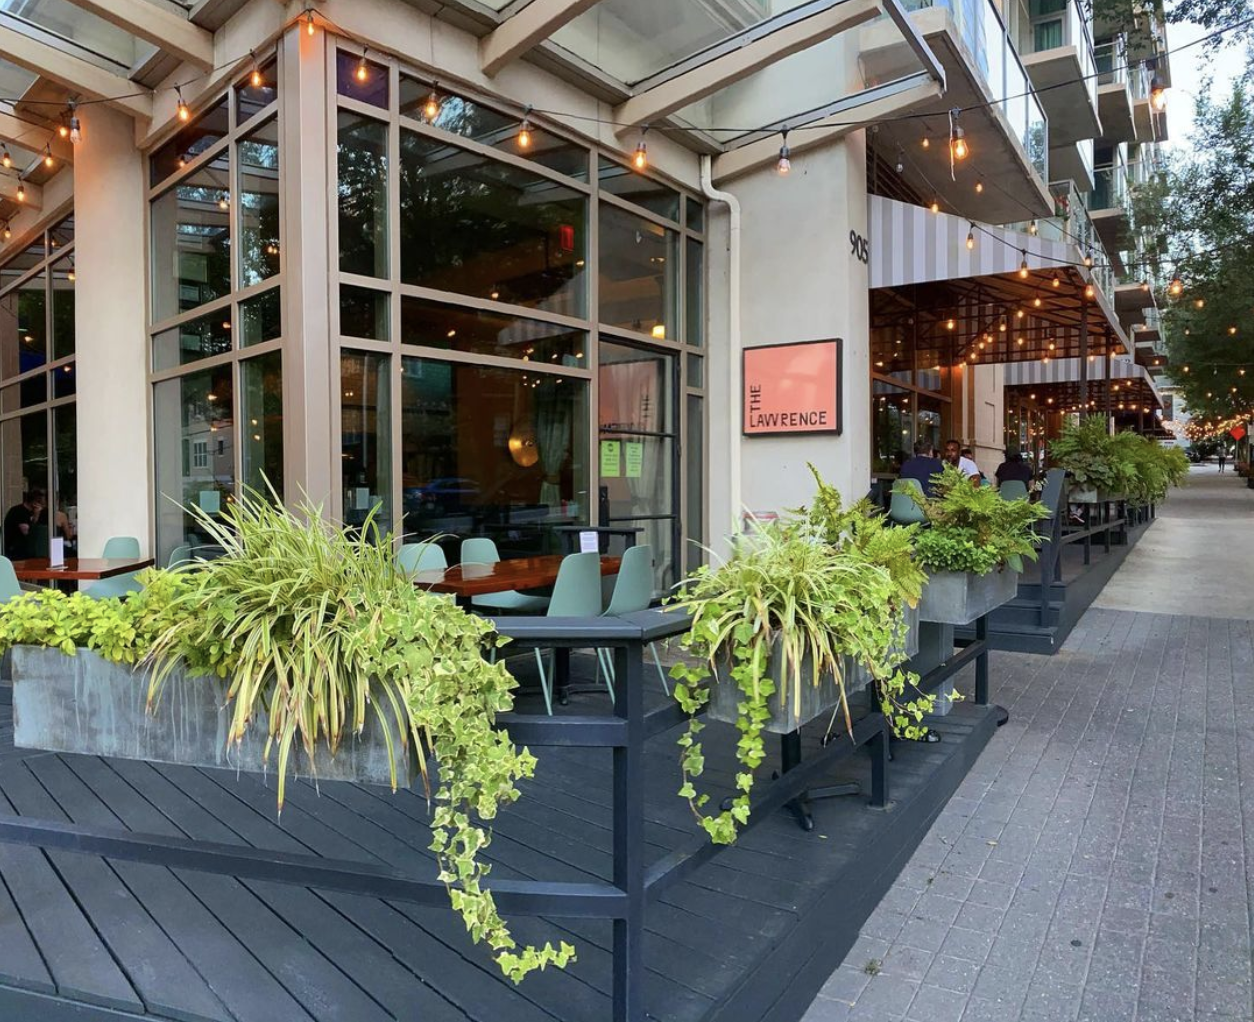 restaurants-with-patios-in-atlanta-best-patio-restaurants-in-atlanta-outdoor-dining-atlanta-covid-
outdoor-brunch-atlanta-covered-patio-decatur-outdoor-bars-atlanta-atlanta-heated-patios-
Eating-with-erica- Atlanta-food-blogger-Canoe-Vinings-The-Chastain-Buckhead-The-Establishment-Colony-Square
-Apres-Diem-Midtown-Rina-beltline-The-Lawrence-Midtown-Lingering-Shade-Beltline-RedBird-Westside-Provisions-
9-Mile-Station-Ponce-City-Market-TWO-Urban-Licks-Beltline-Toast-on-Lenox-Buckhead
